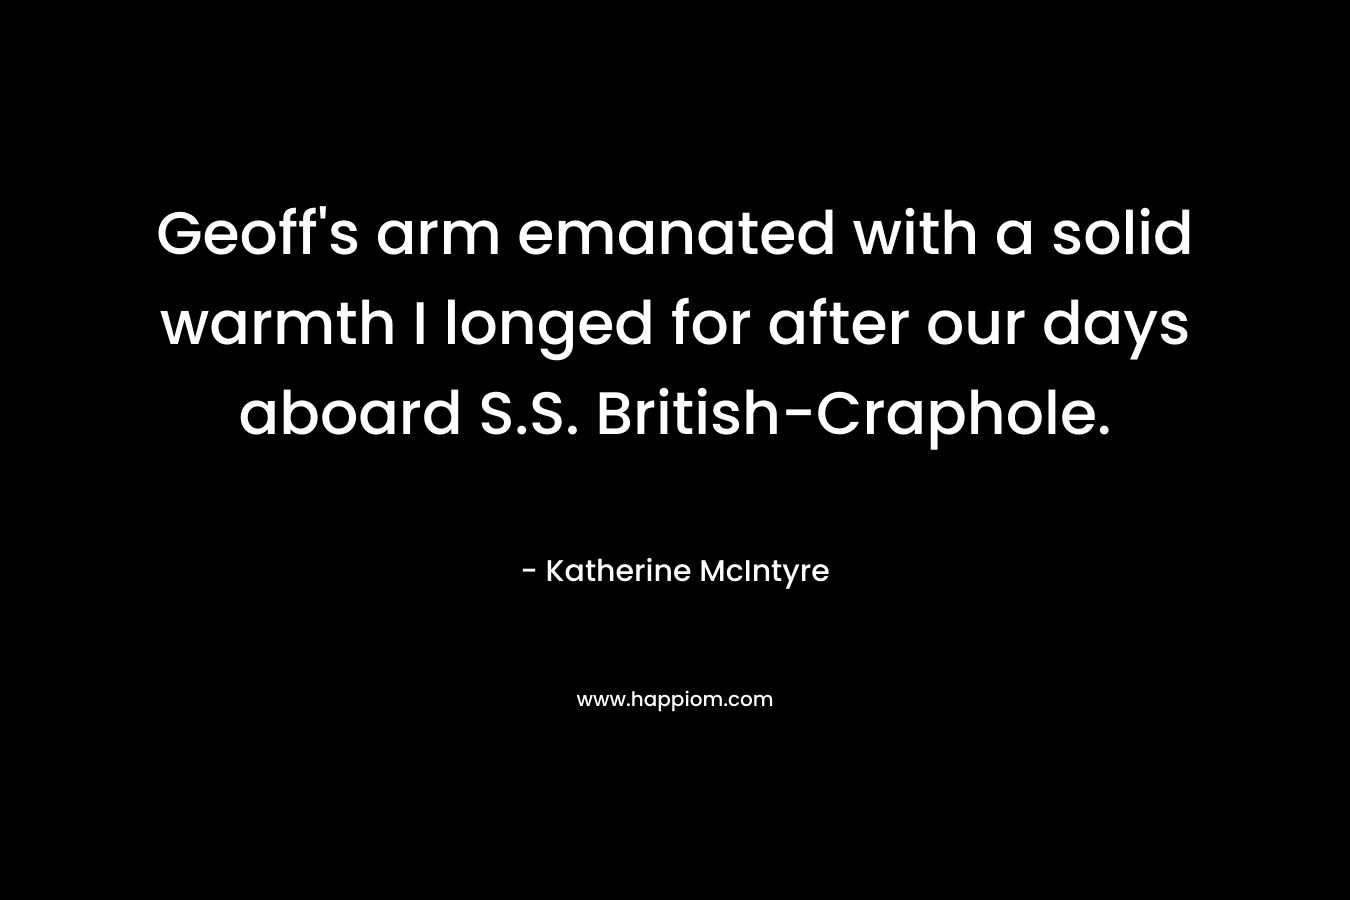 Geoff’s arm emanated with a solid warmth I longed for after our days aboard S.S. British-Craphole. – Katherine McIntyre